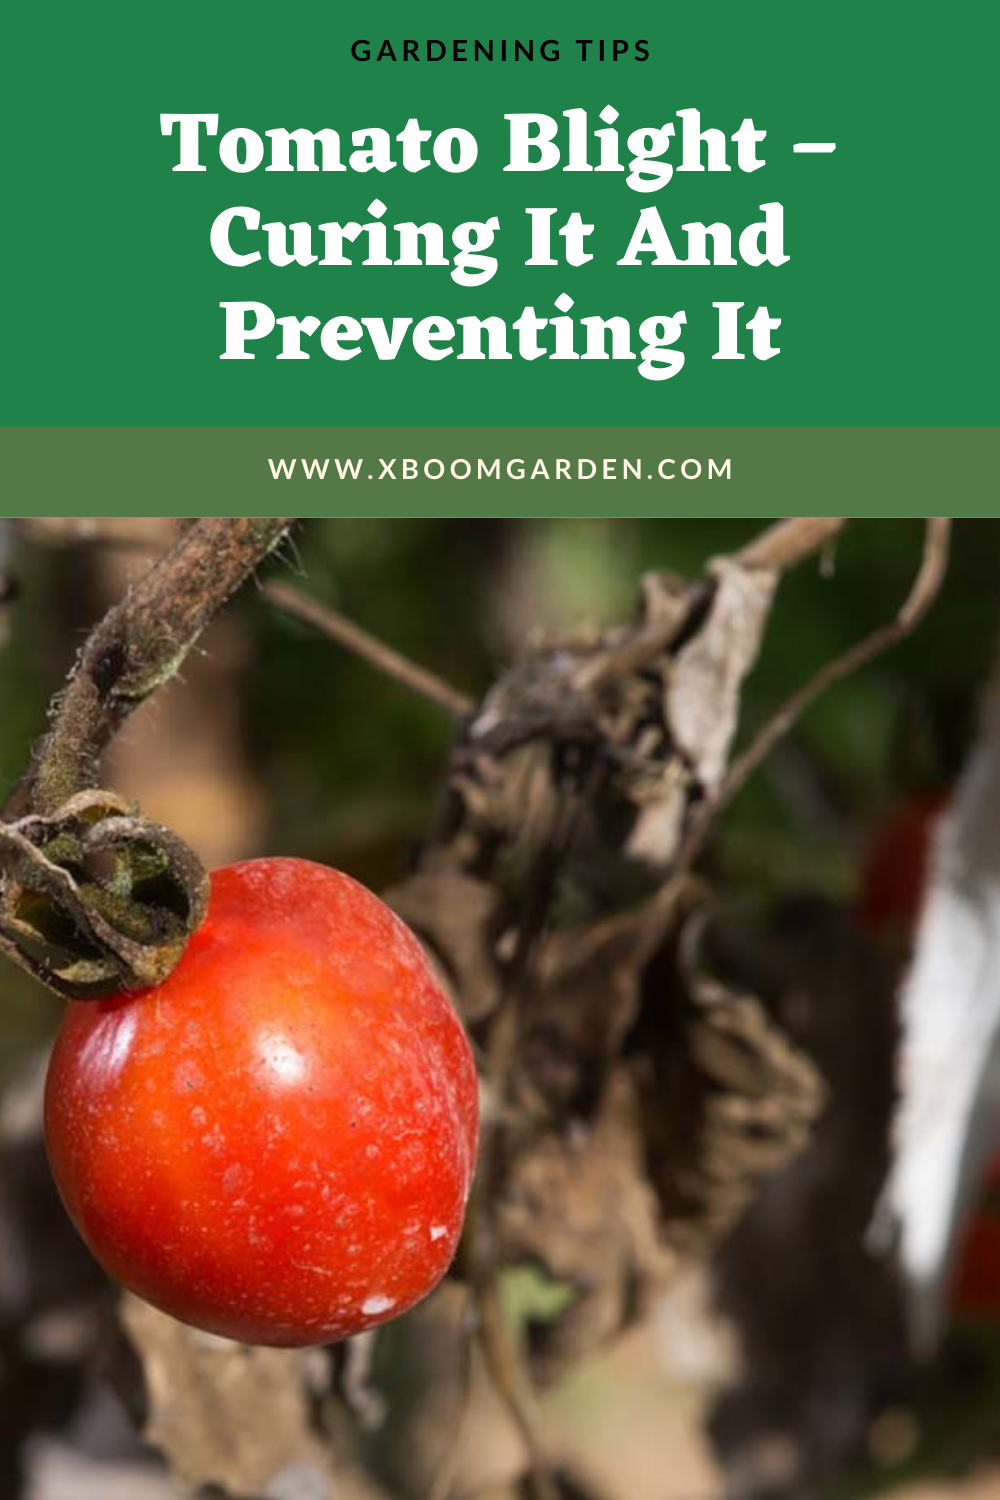 How To Get Rid Of Late Blight On Tomatoes